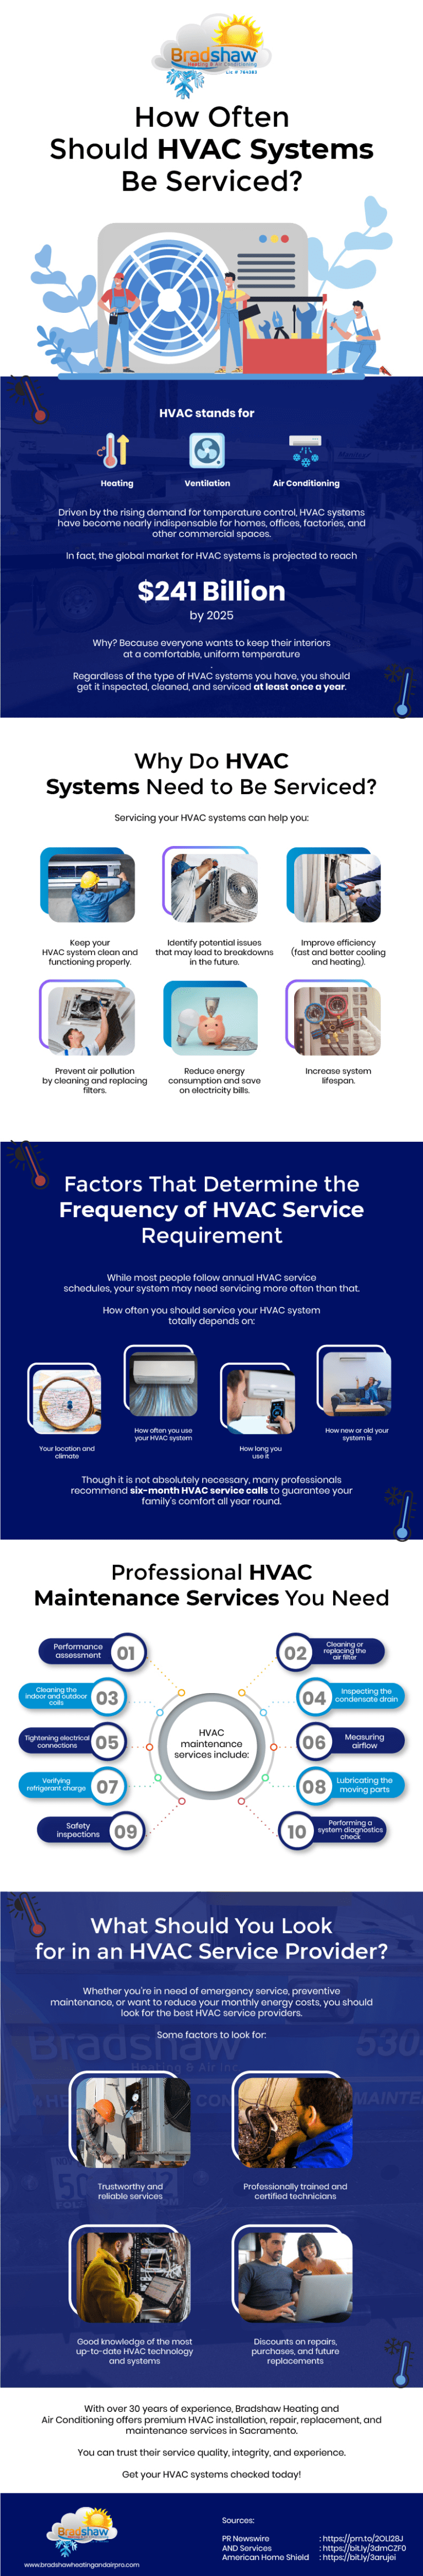 'How Often Should HVAC Systems Be Serviced? 